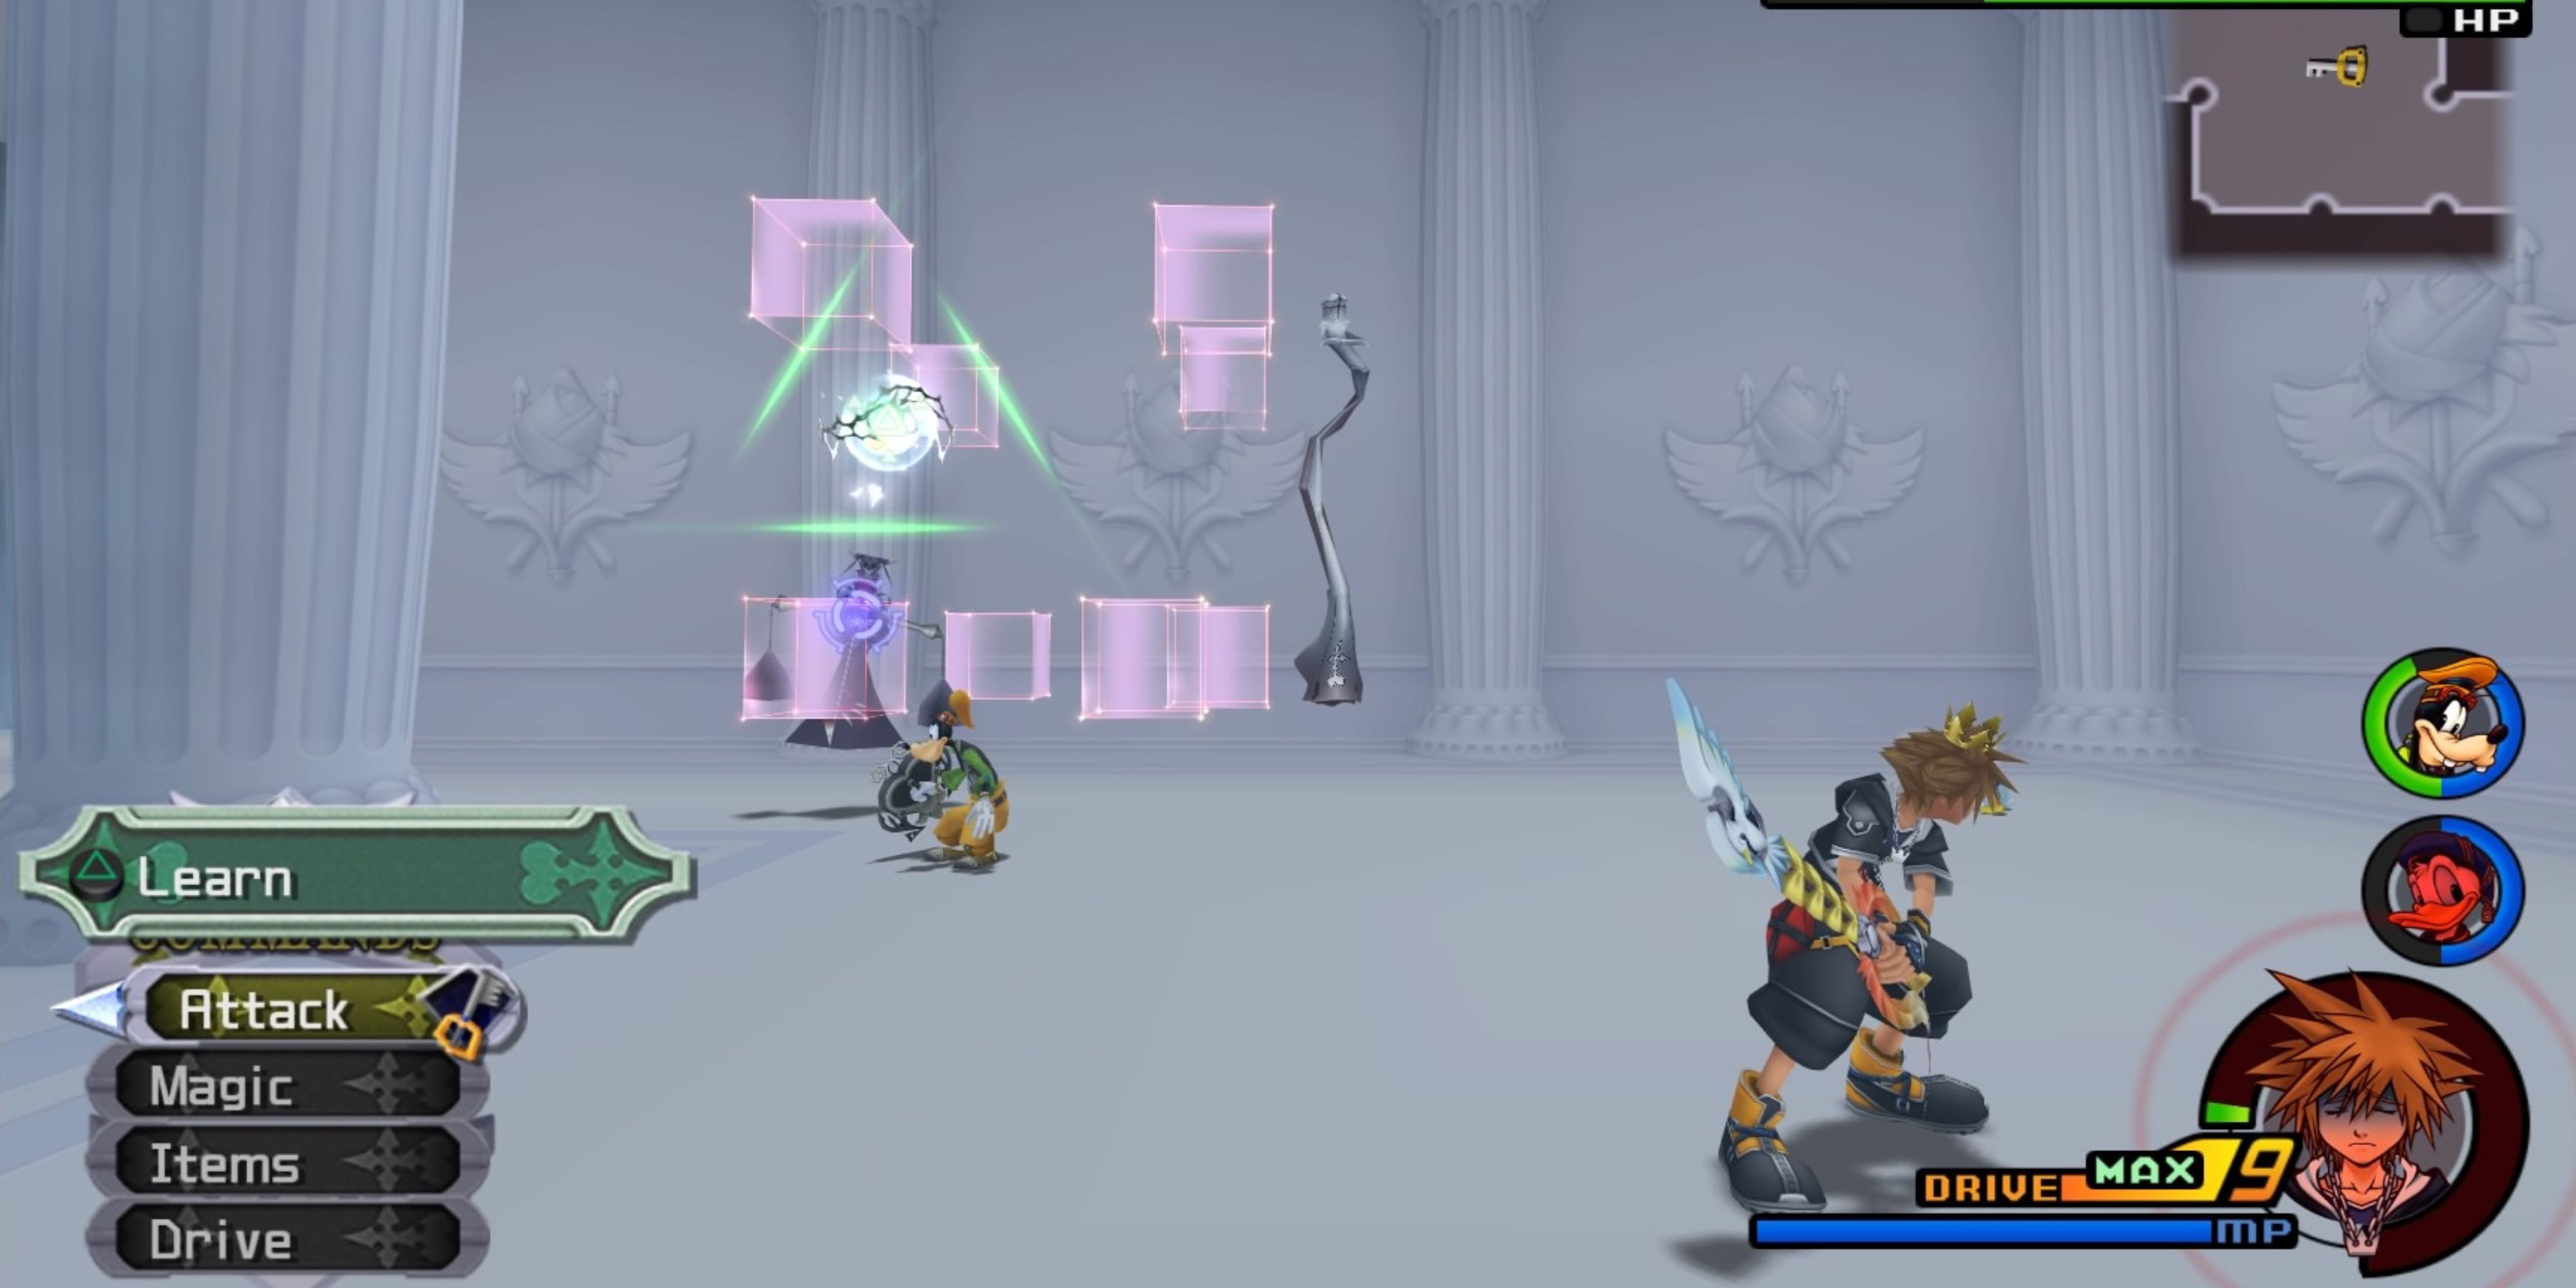 Sora uses EXP Boost to fight a bunch of Nobodies inside the Cavern of Remembrance.